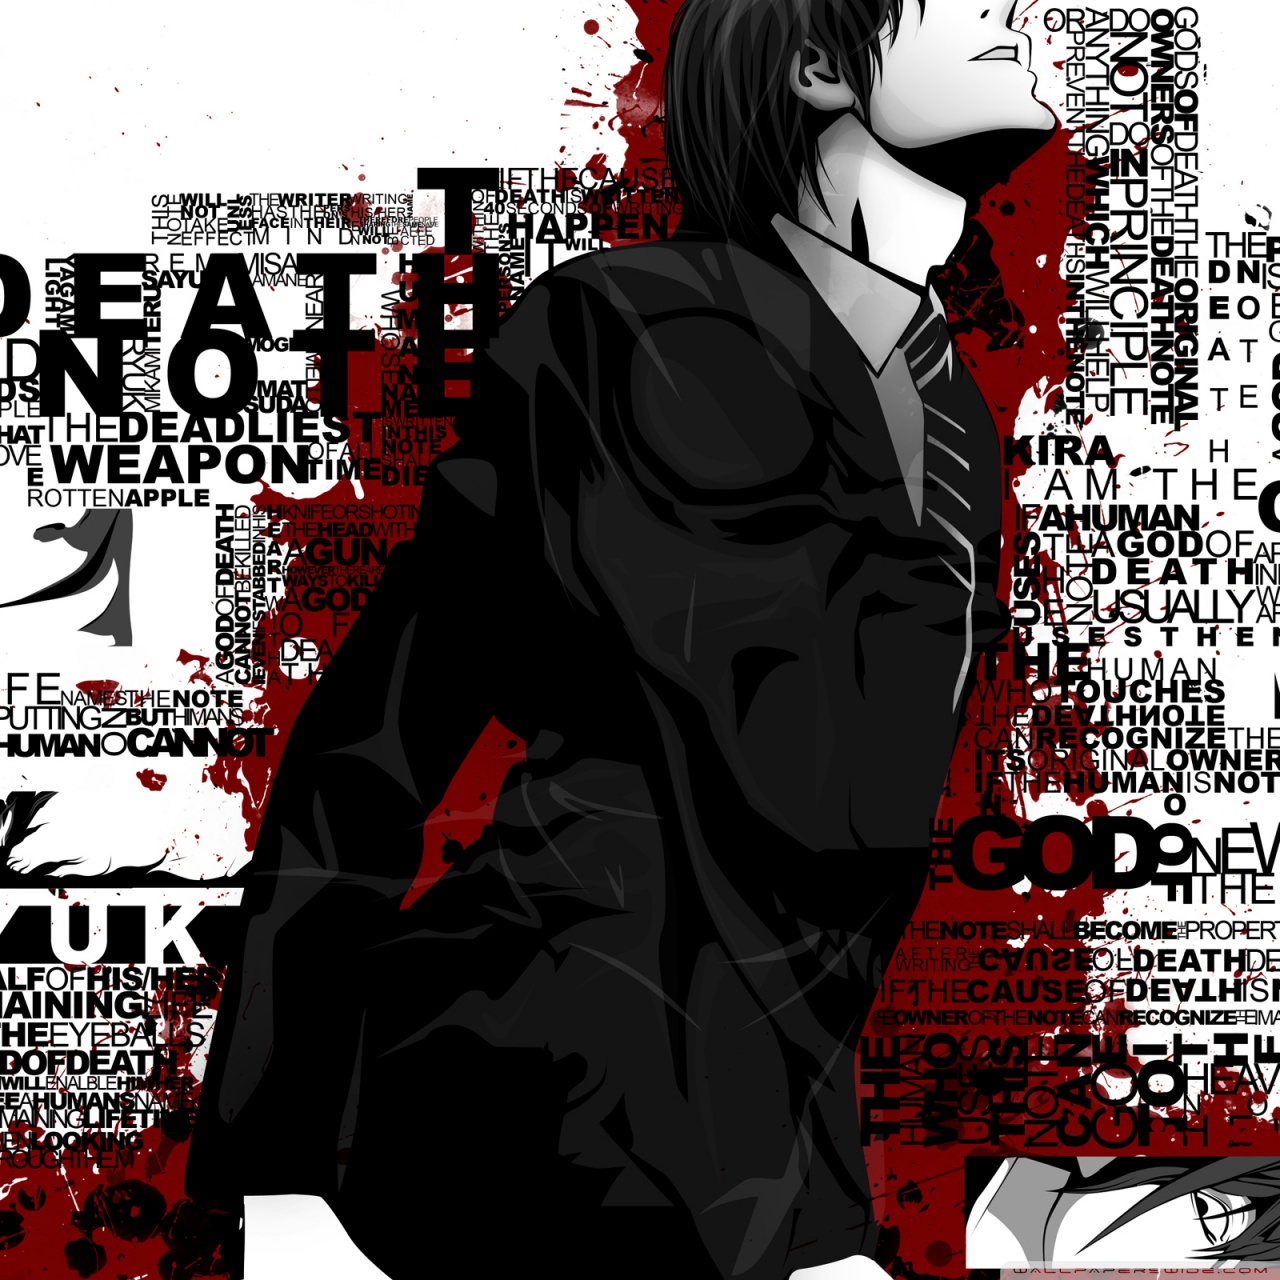 Ultra Hd Death Note Wallpaper Hd For Android Explore and download tons of high quality death note wallpapers all for free! random posts